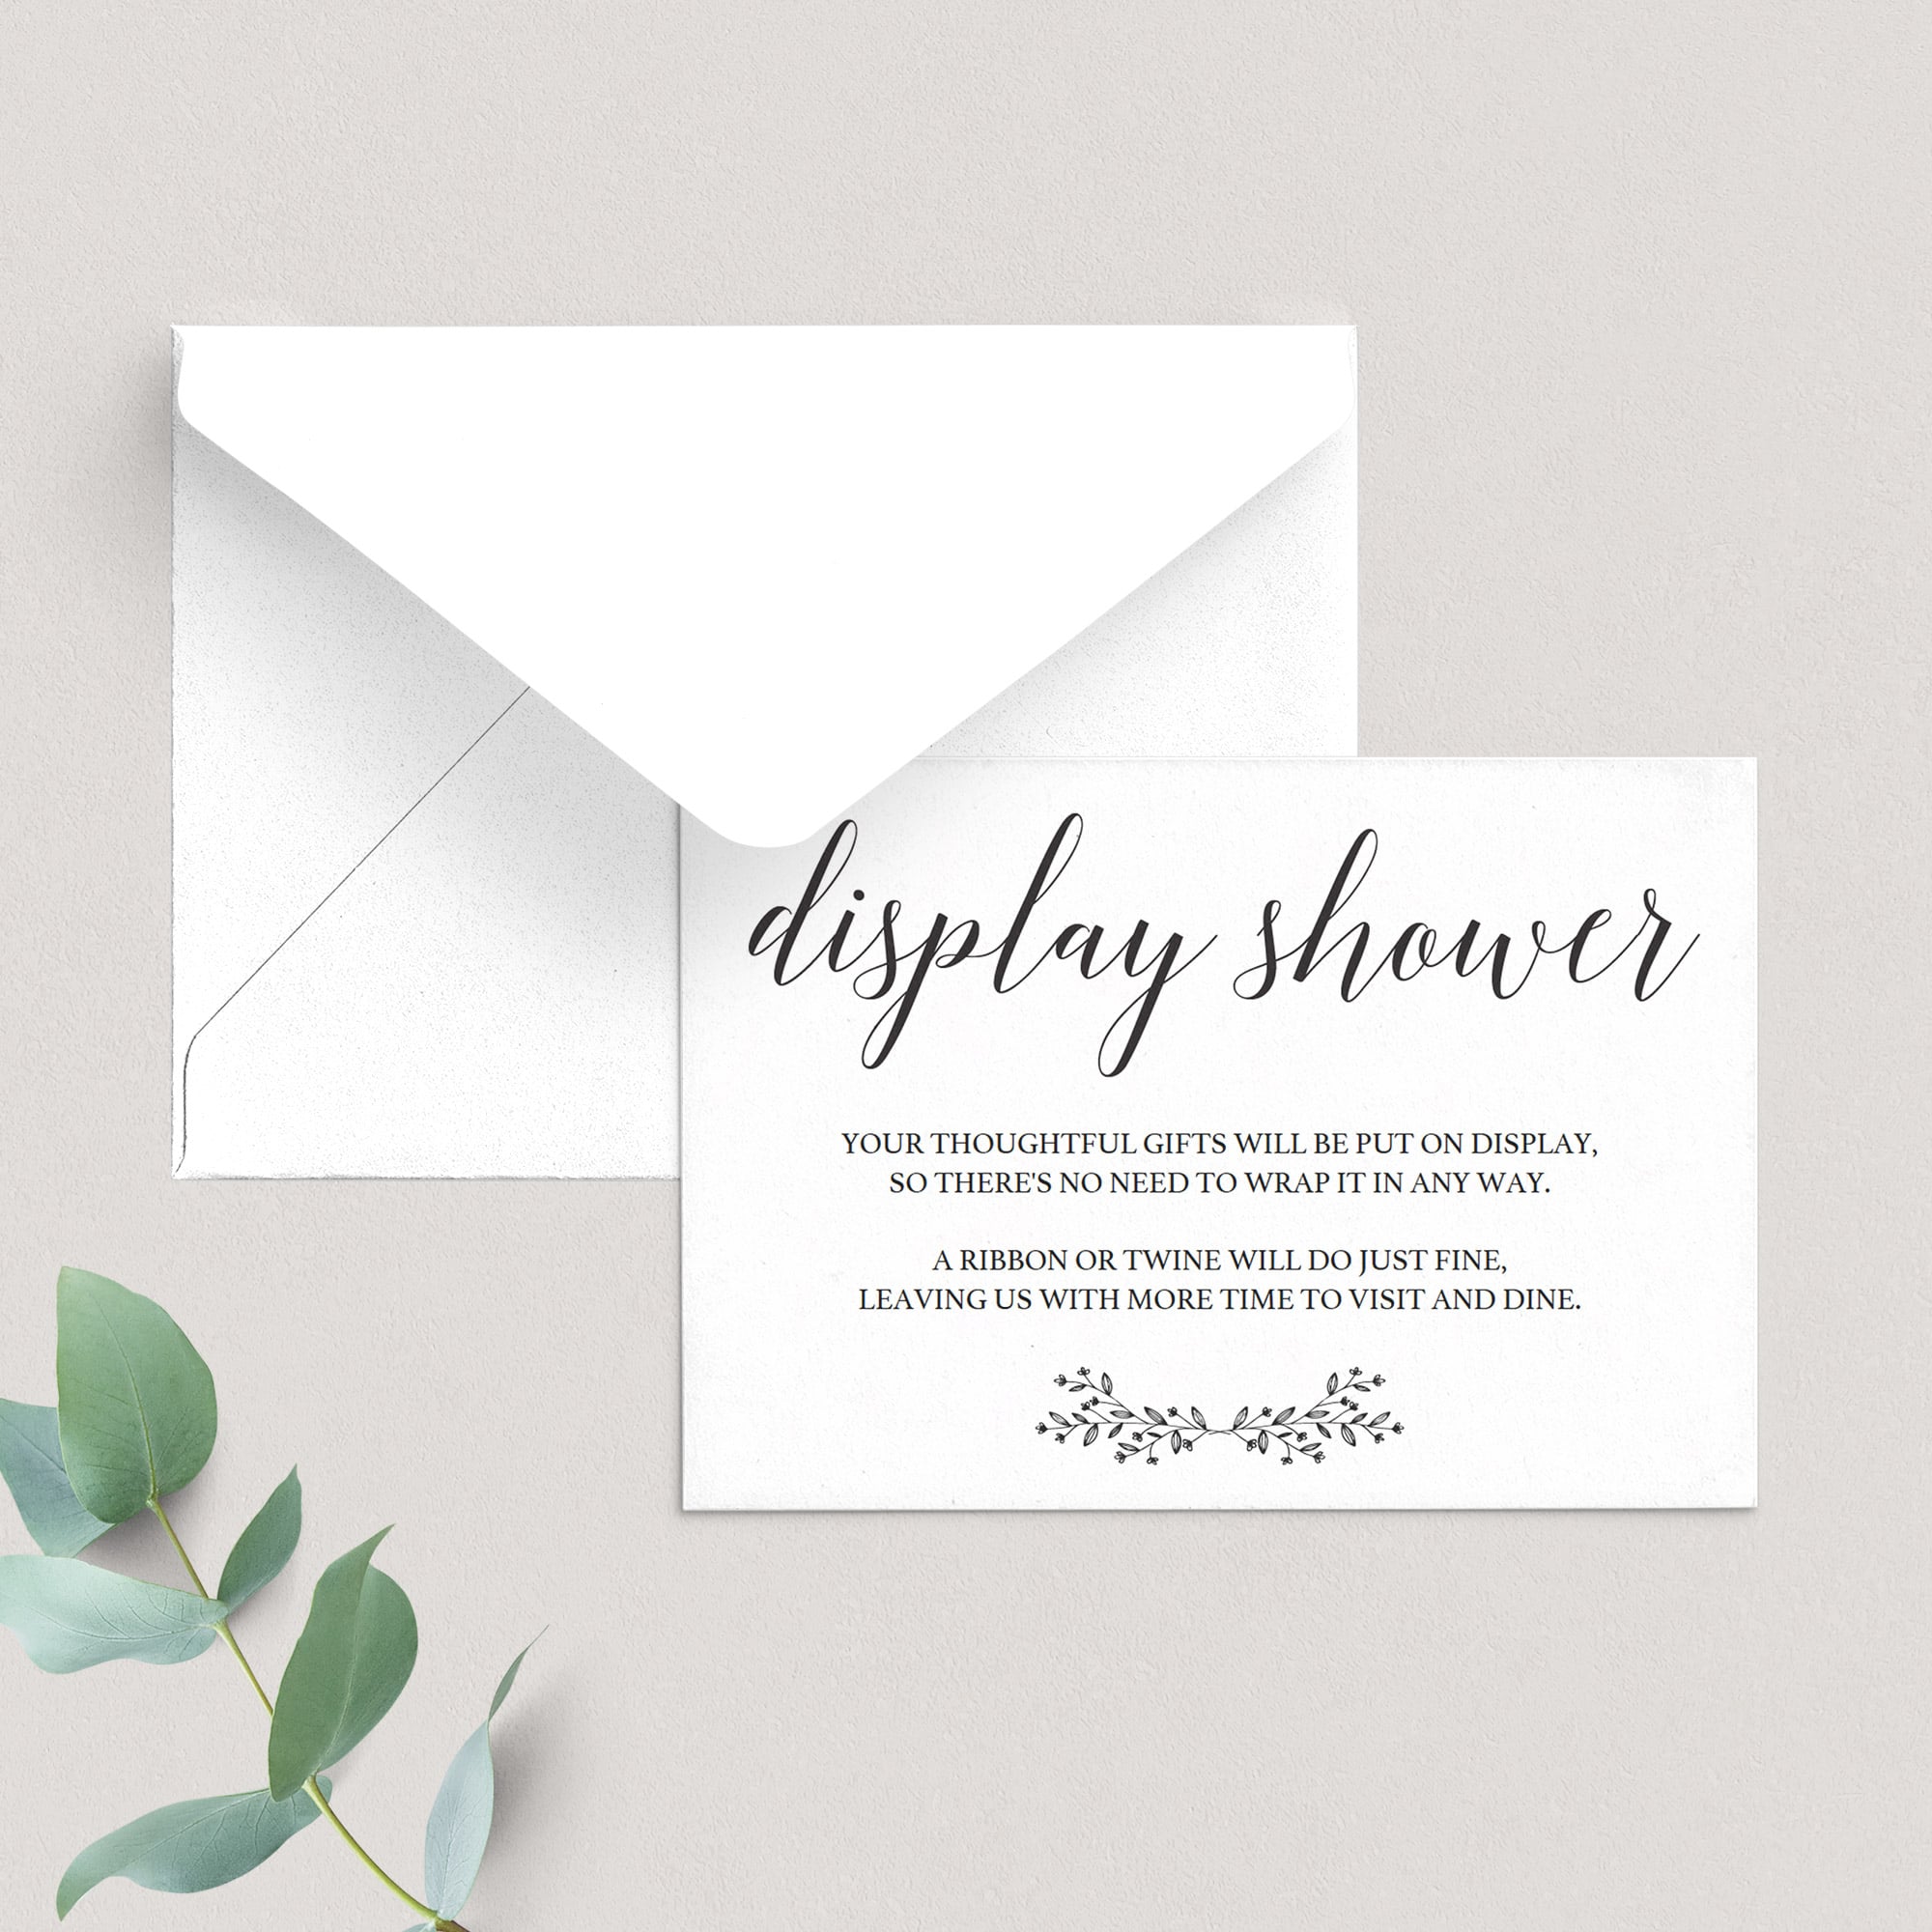 Minimal Display Shower Card Template by LittleSizzle